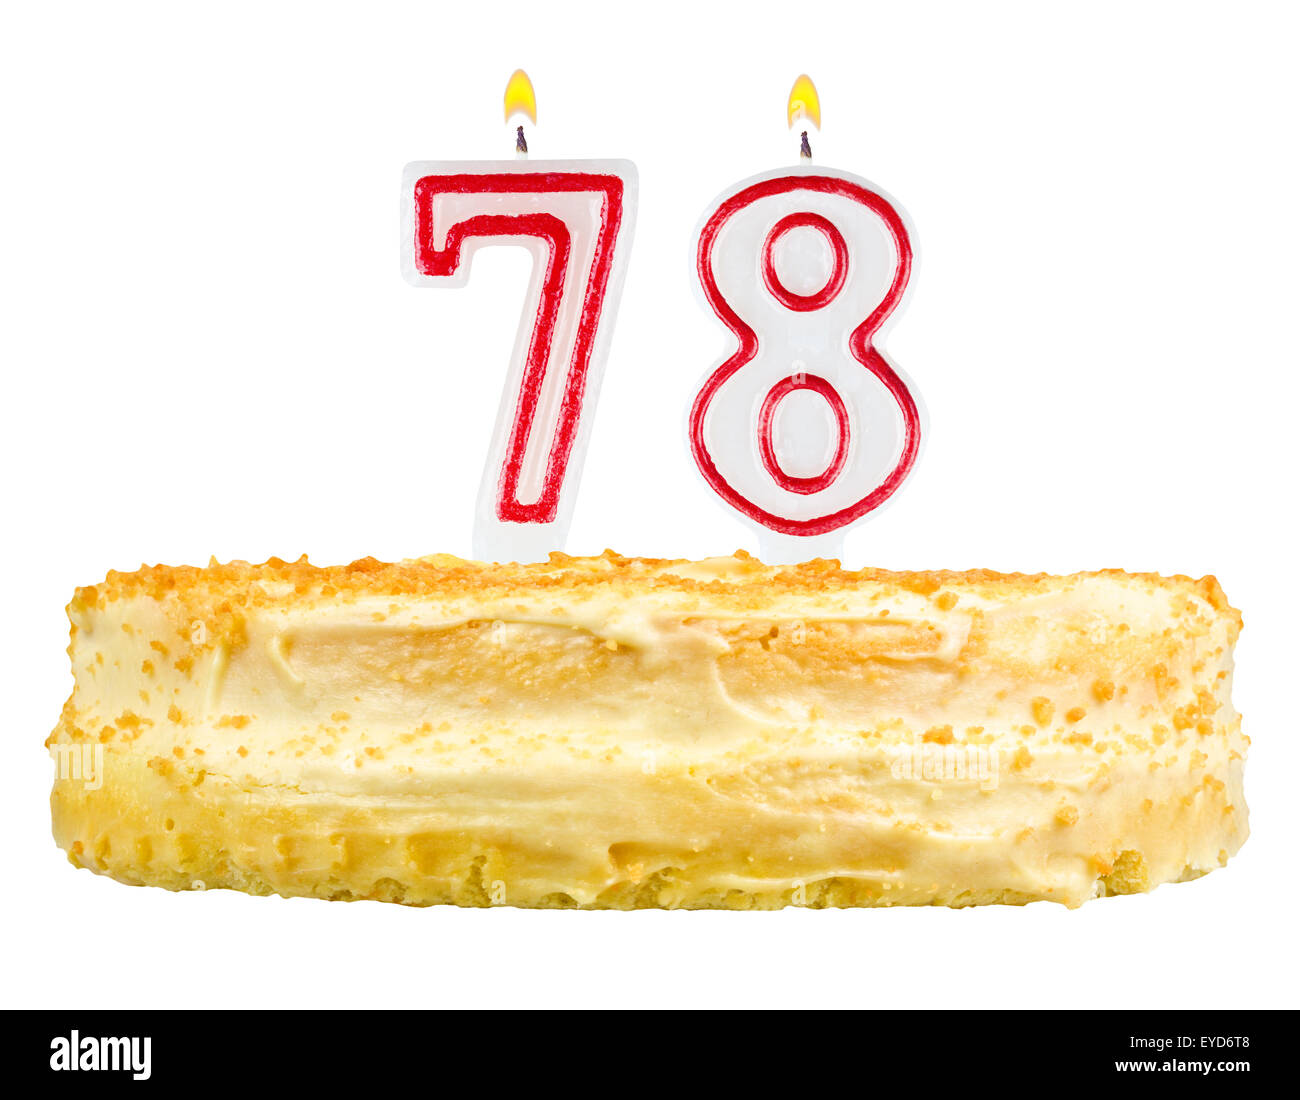 birthday cake with candles number seventy eight isolated on white background Stock Photo